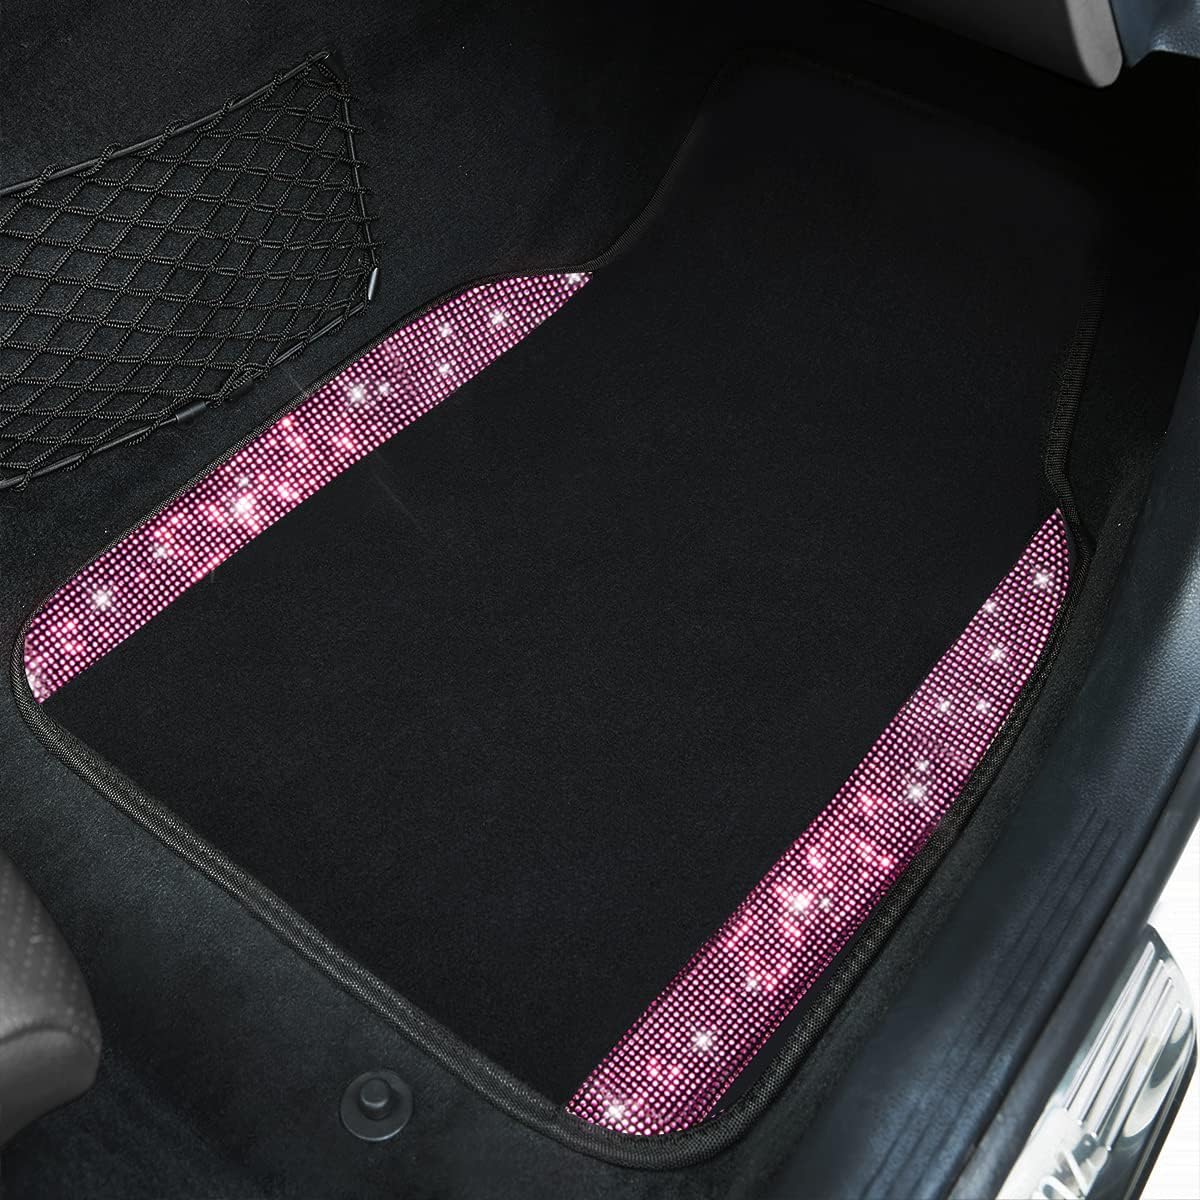 CAR PASS Bling Diamond Car Floor Mats & Car Steering Wheel Cover & Car Seat Cover Two Fromt Seats, Pink Diamond